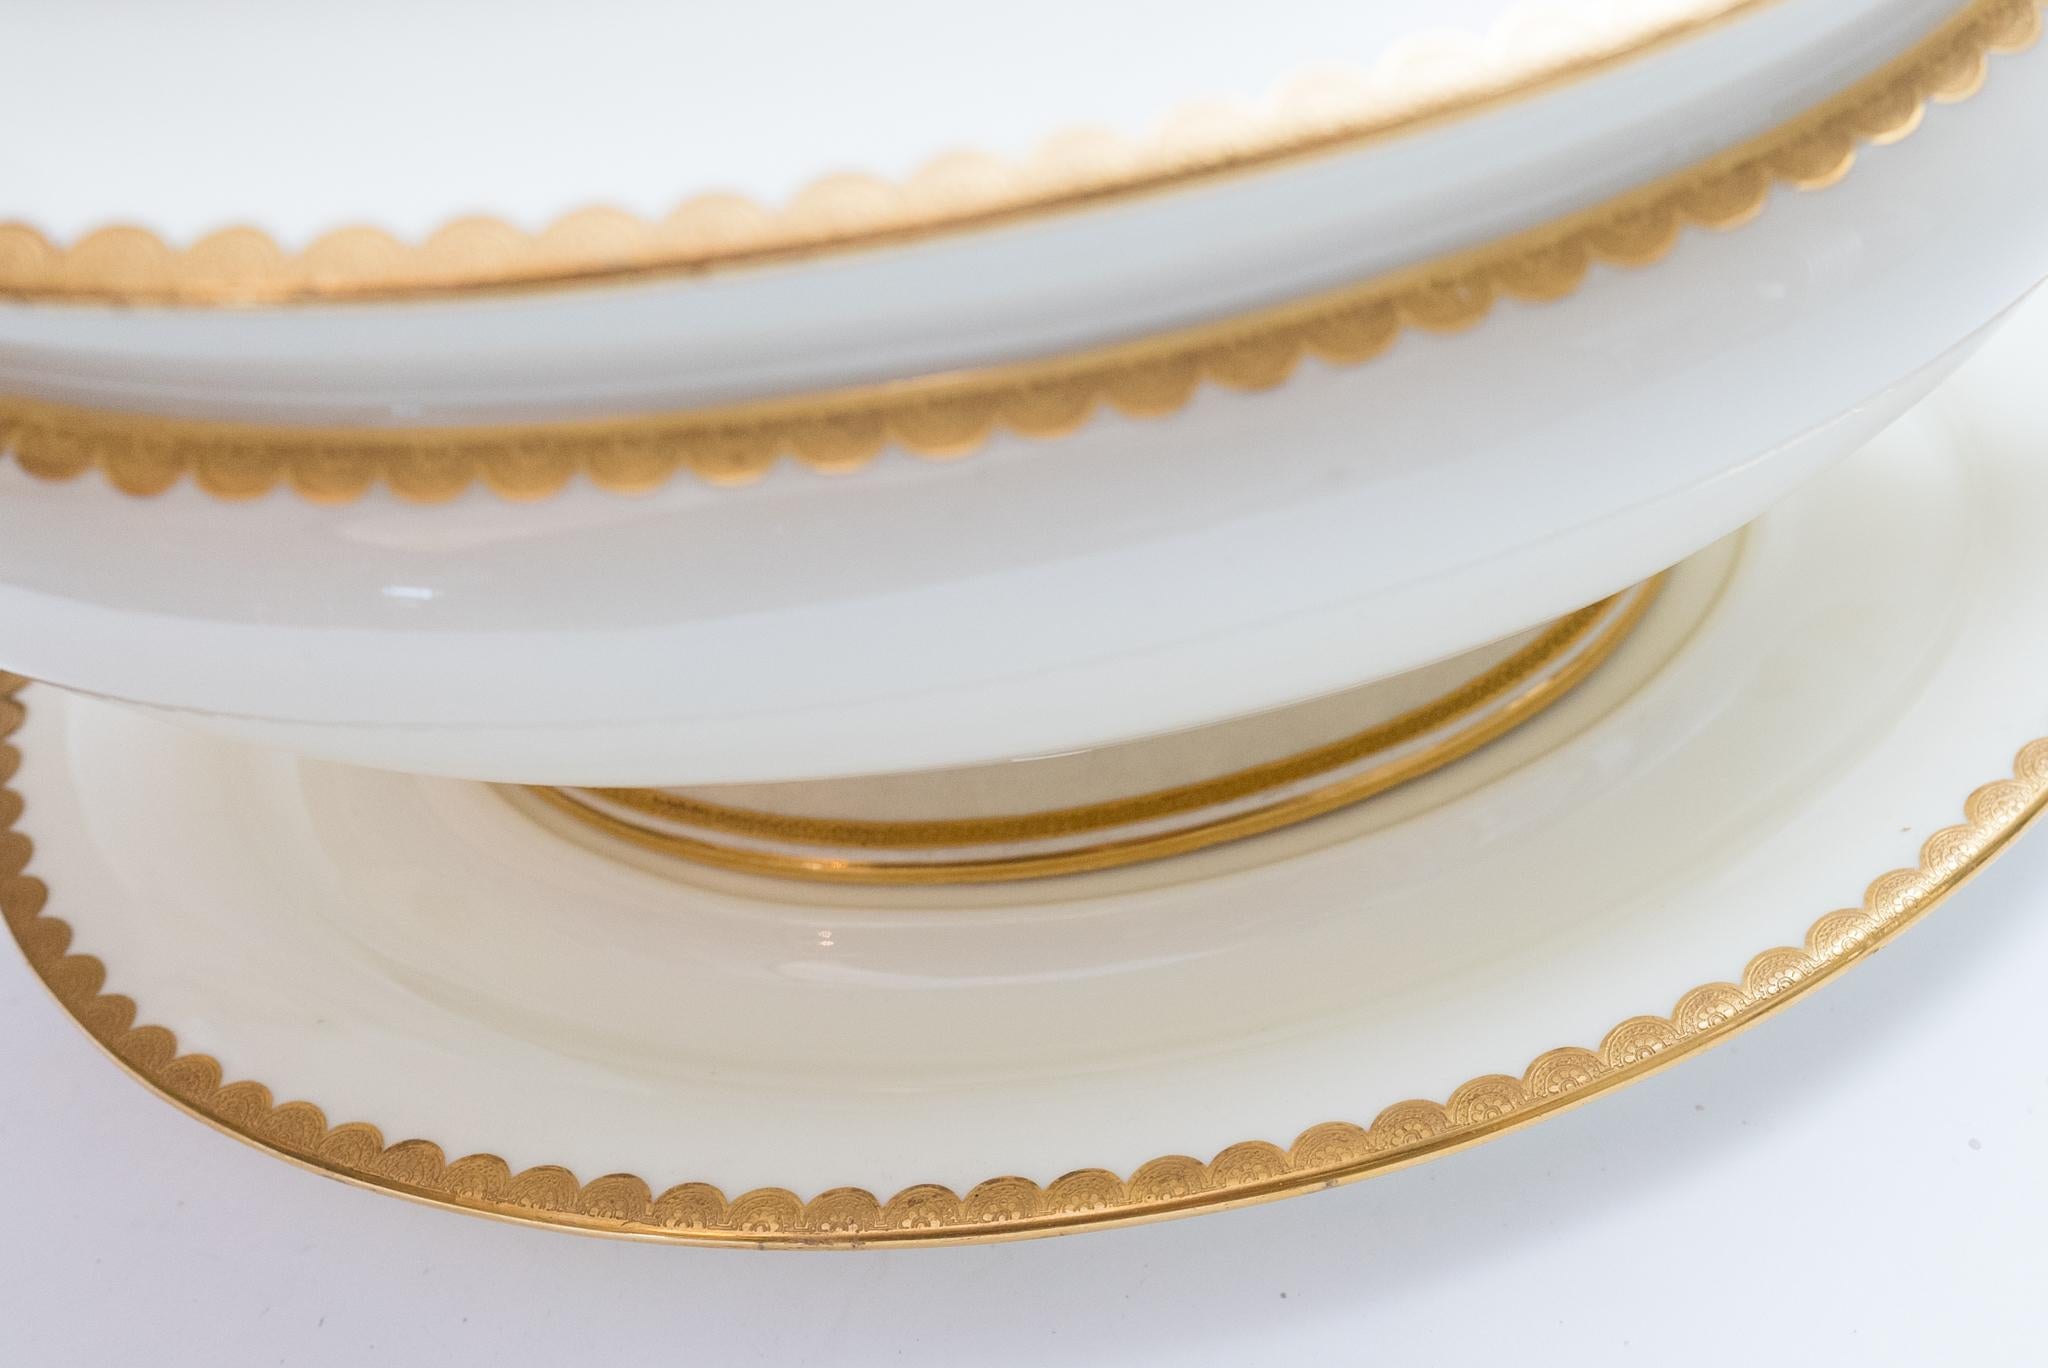 Hand-Crafted Elegant Minton England Soup Tureen and Platter. Scalloped Gilt Design Circa 1920